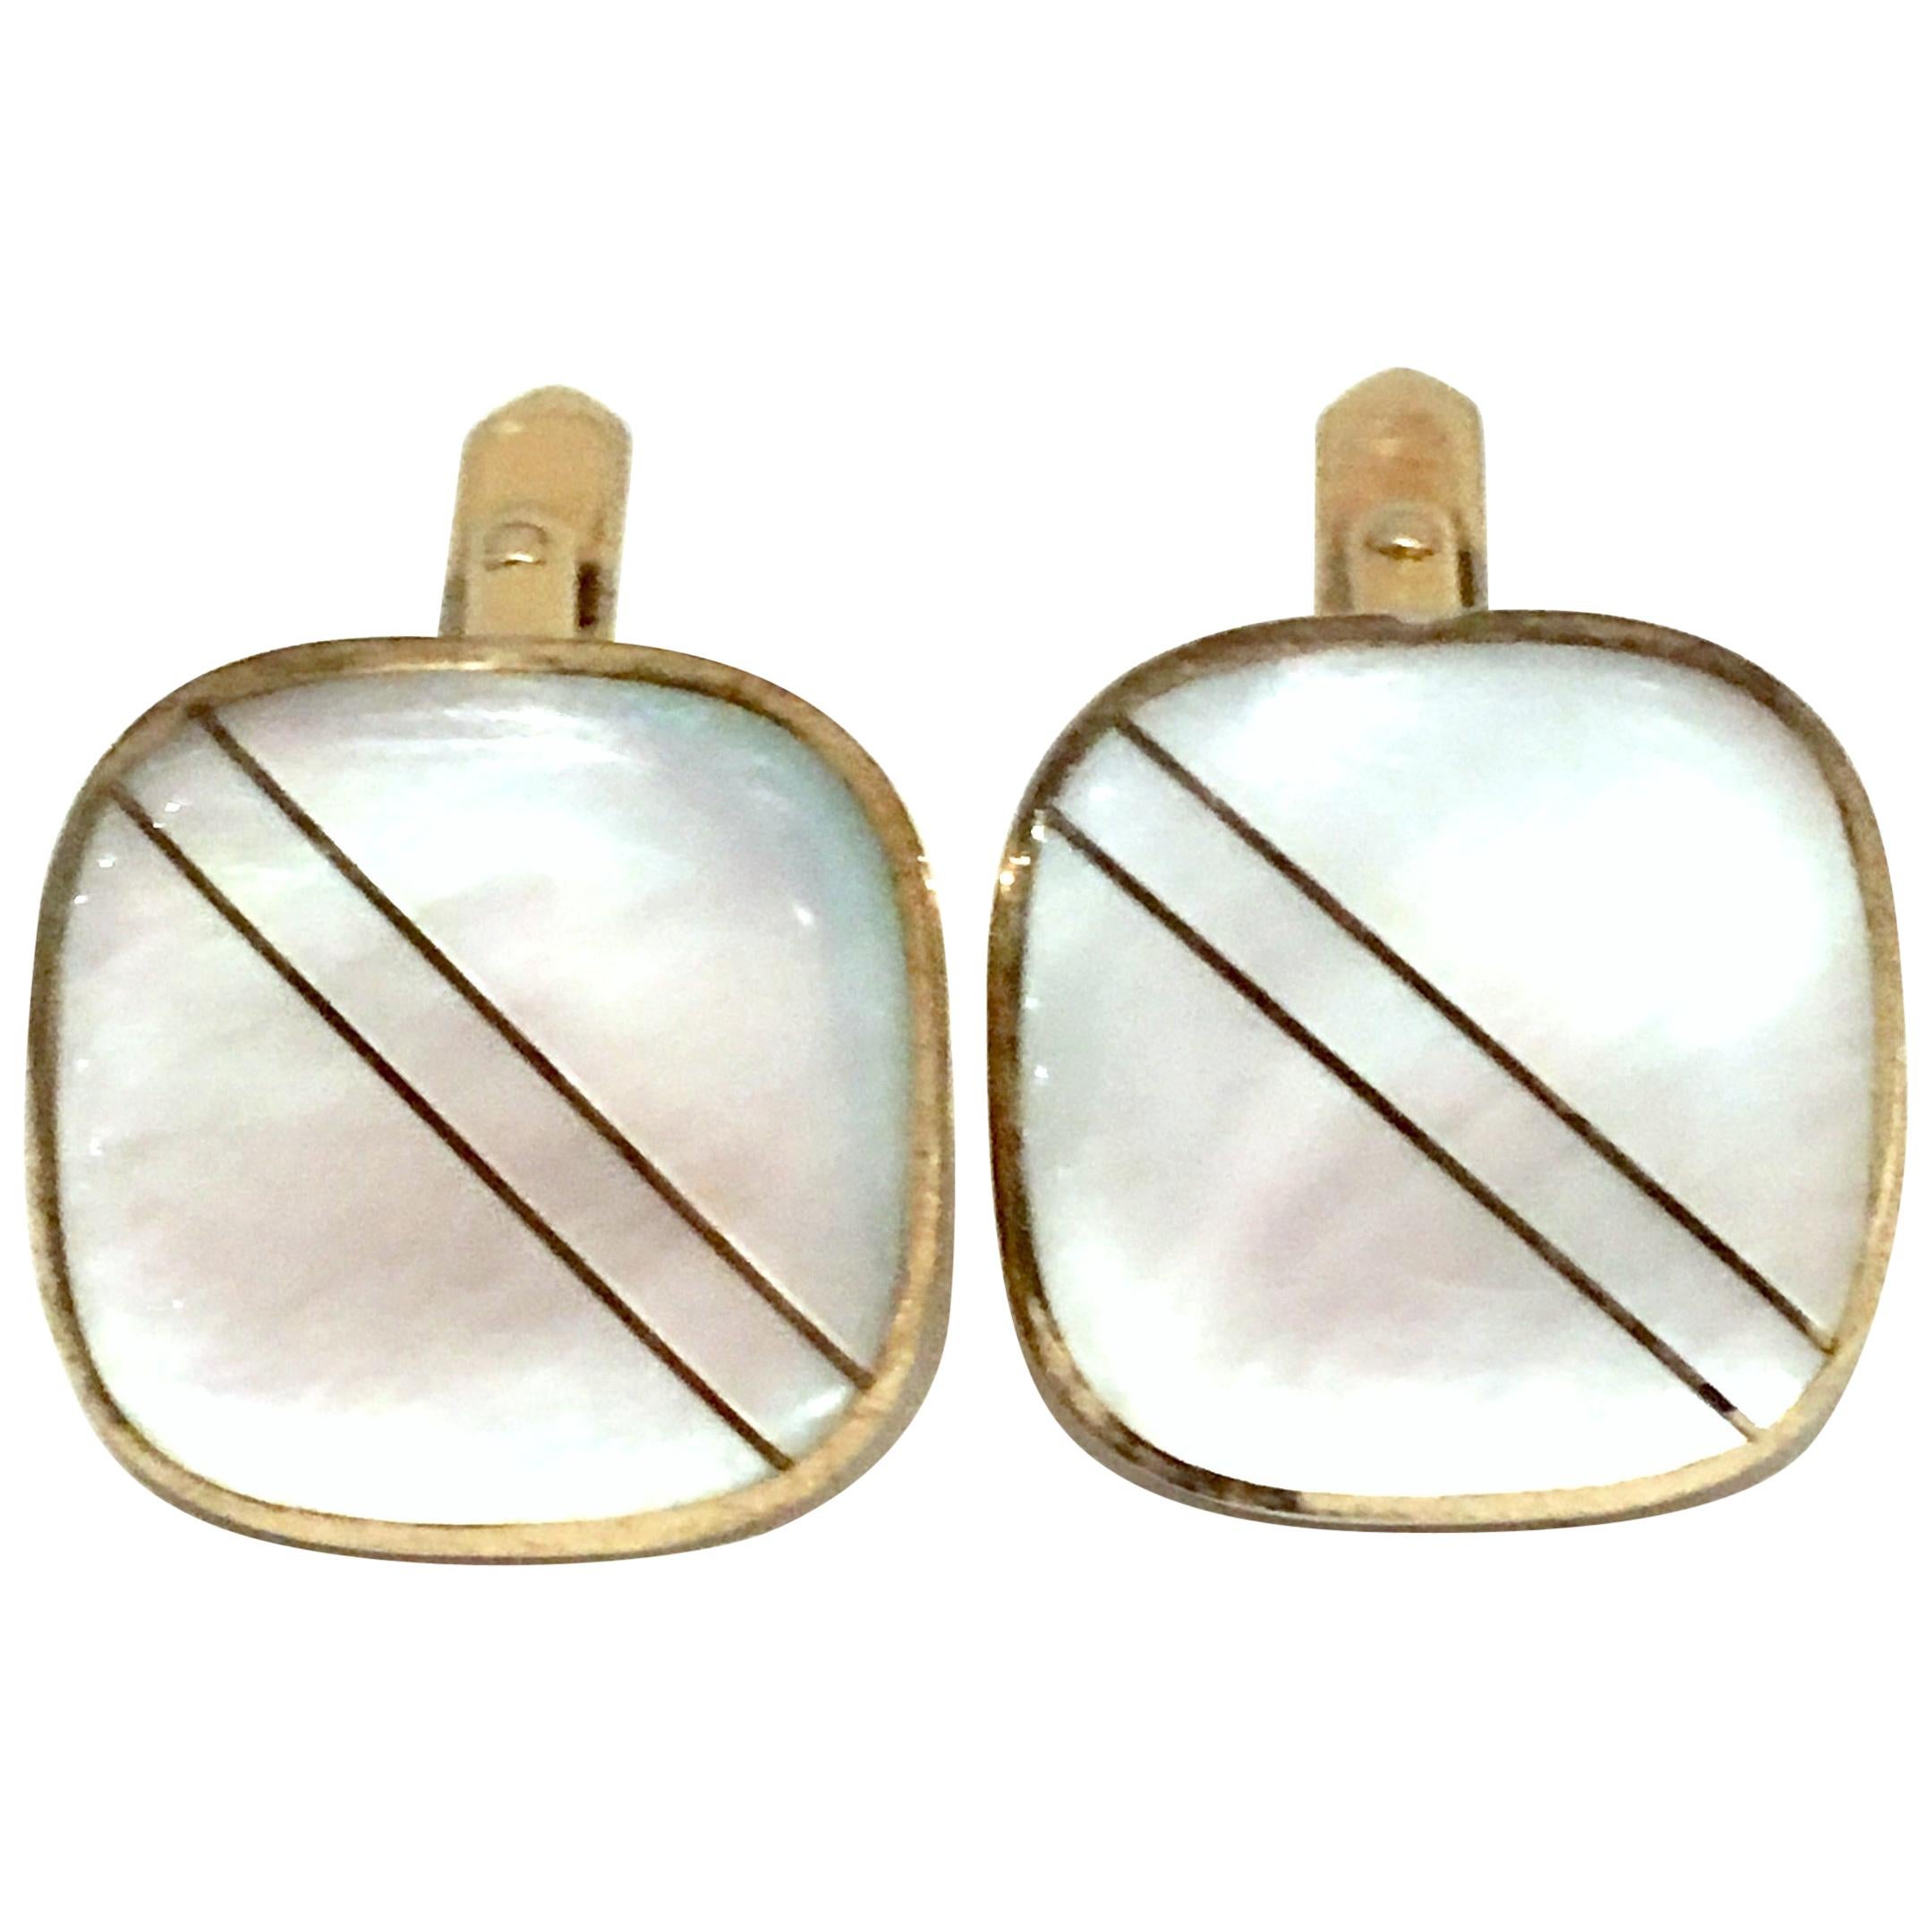 20th Century Pair Of Gold & Mother Of Pearl Cufflinks